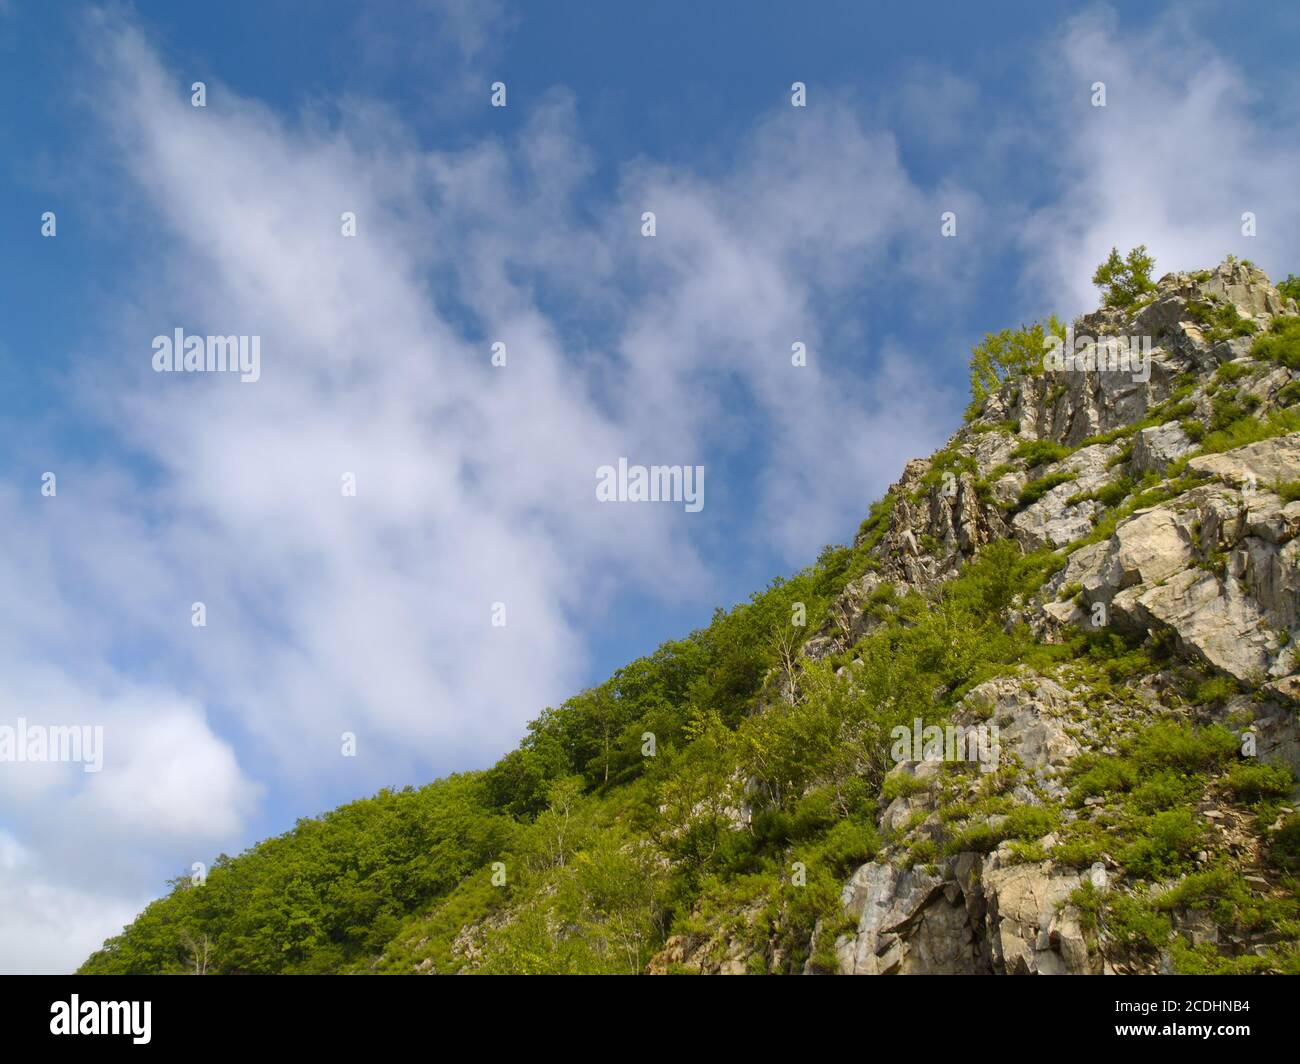 Stone declivity of mountain under cloudy sky Stock Photo